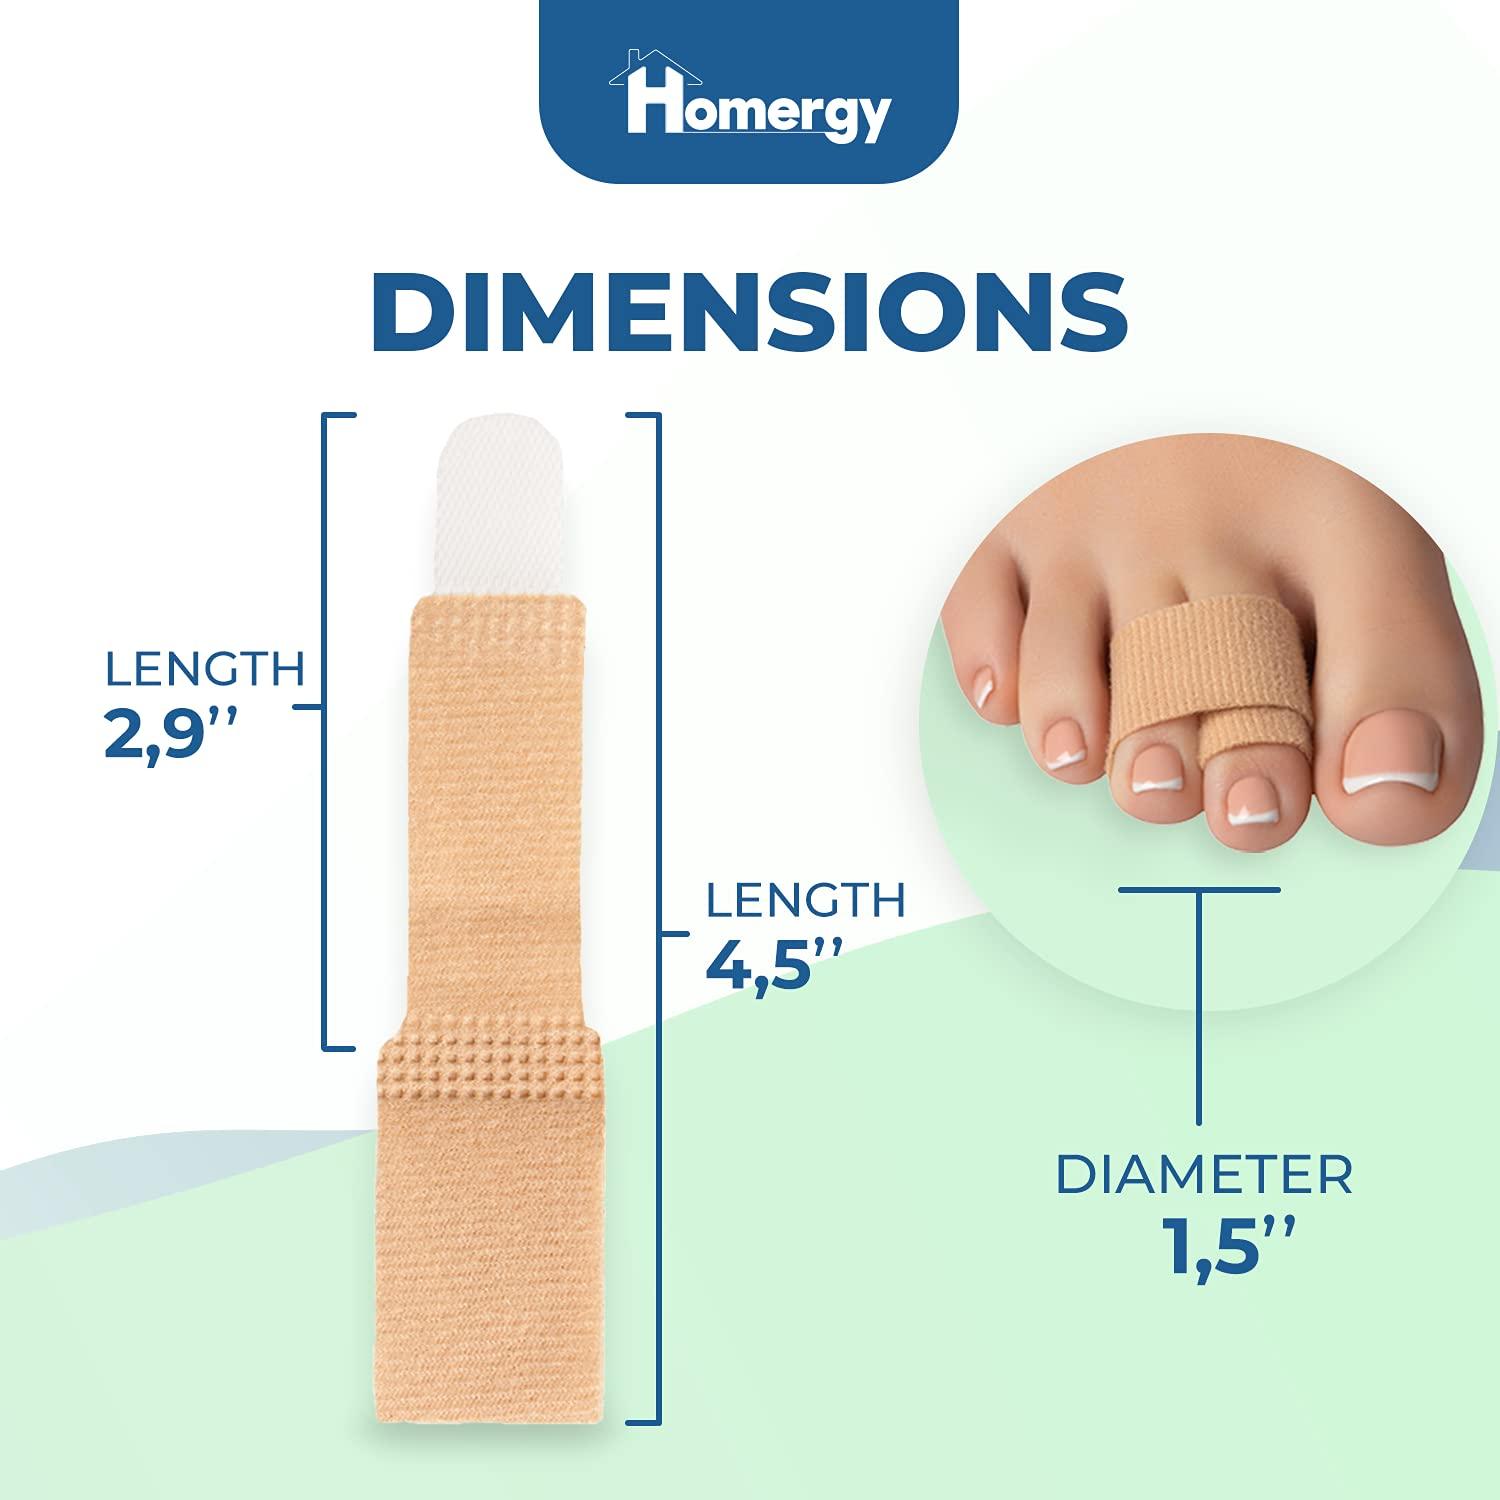 Top 4 Best Products for Hammer Toe Pain